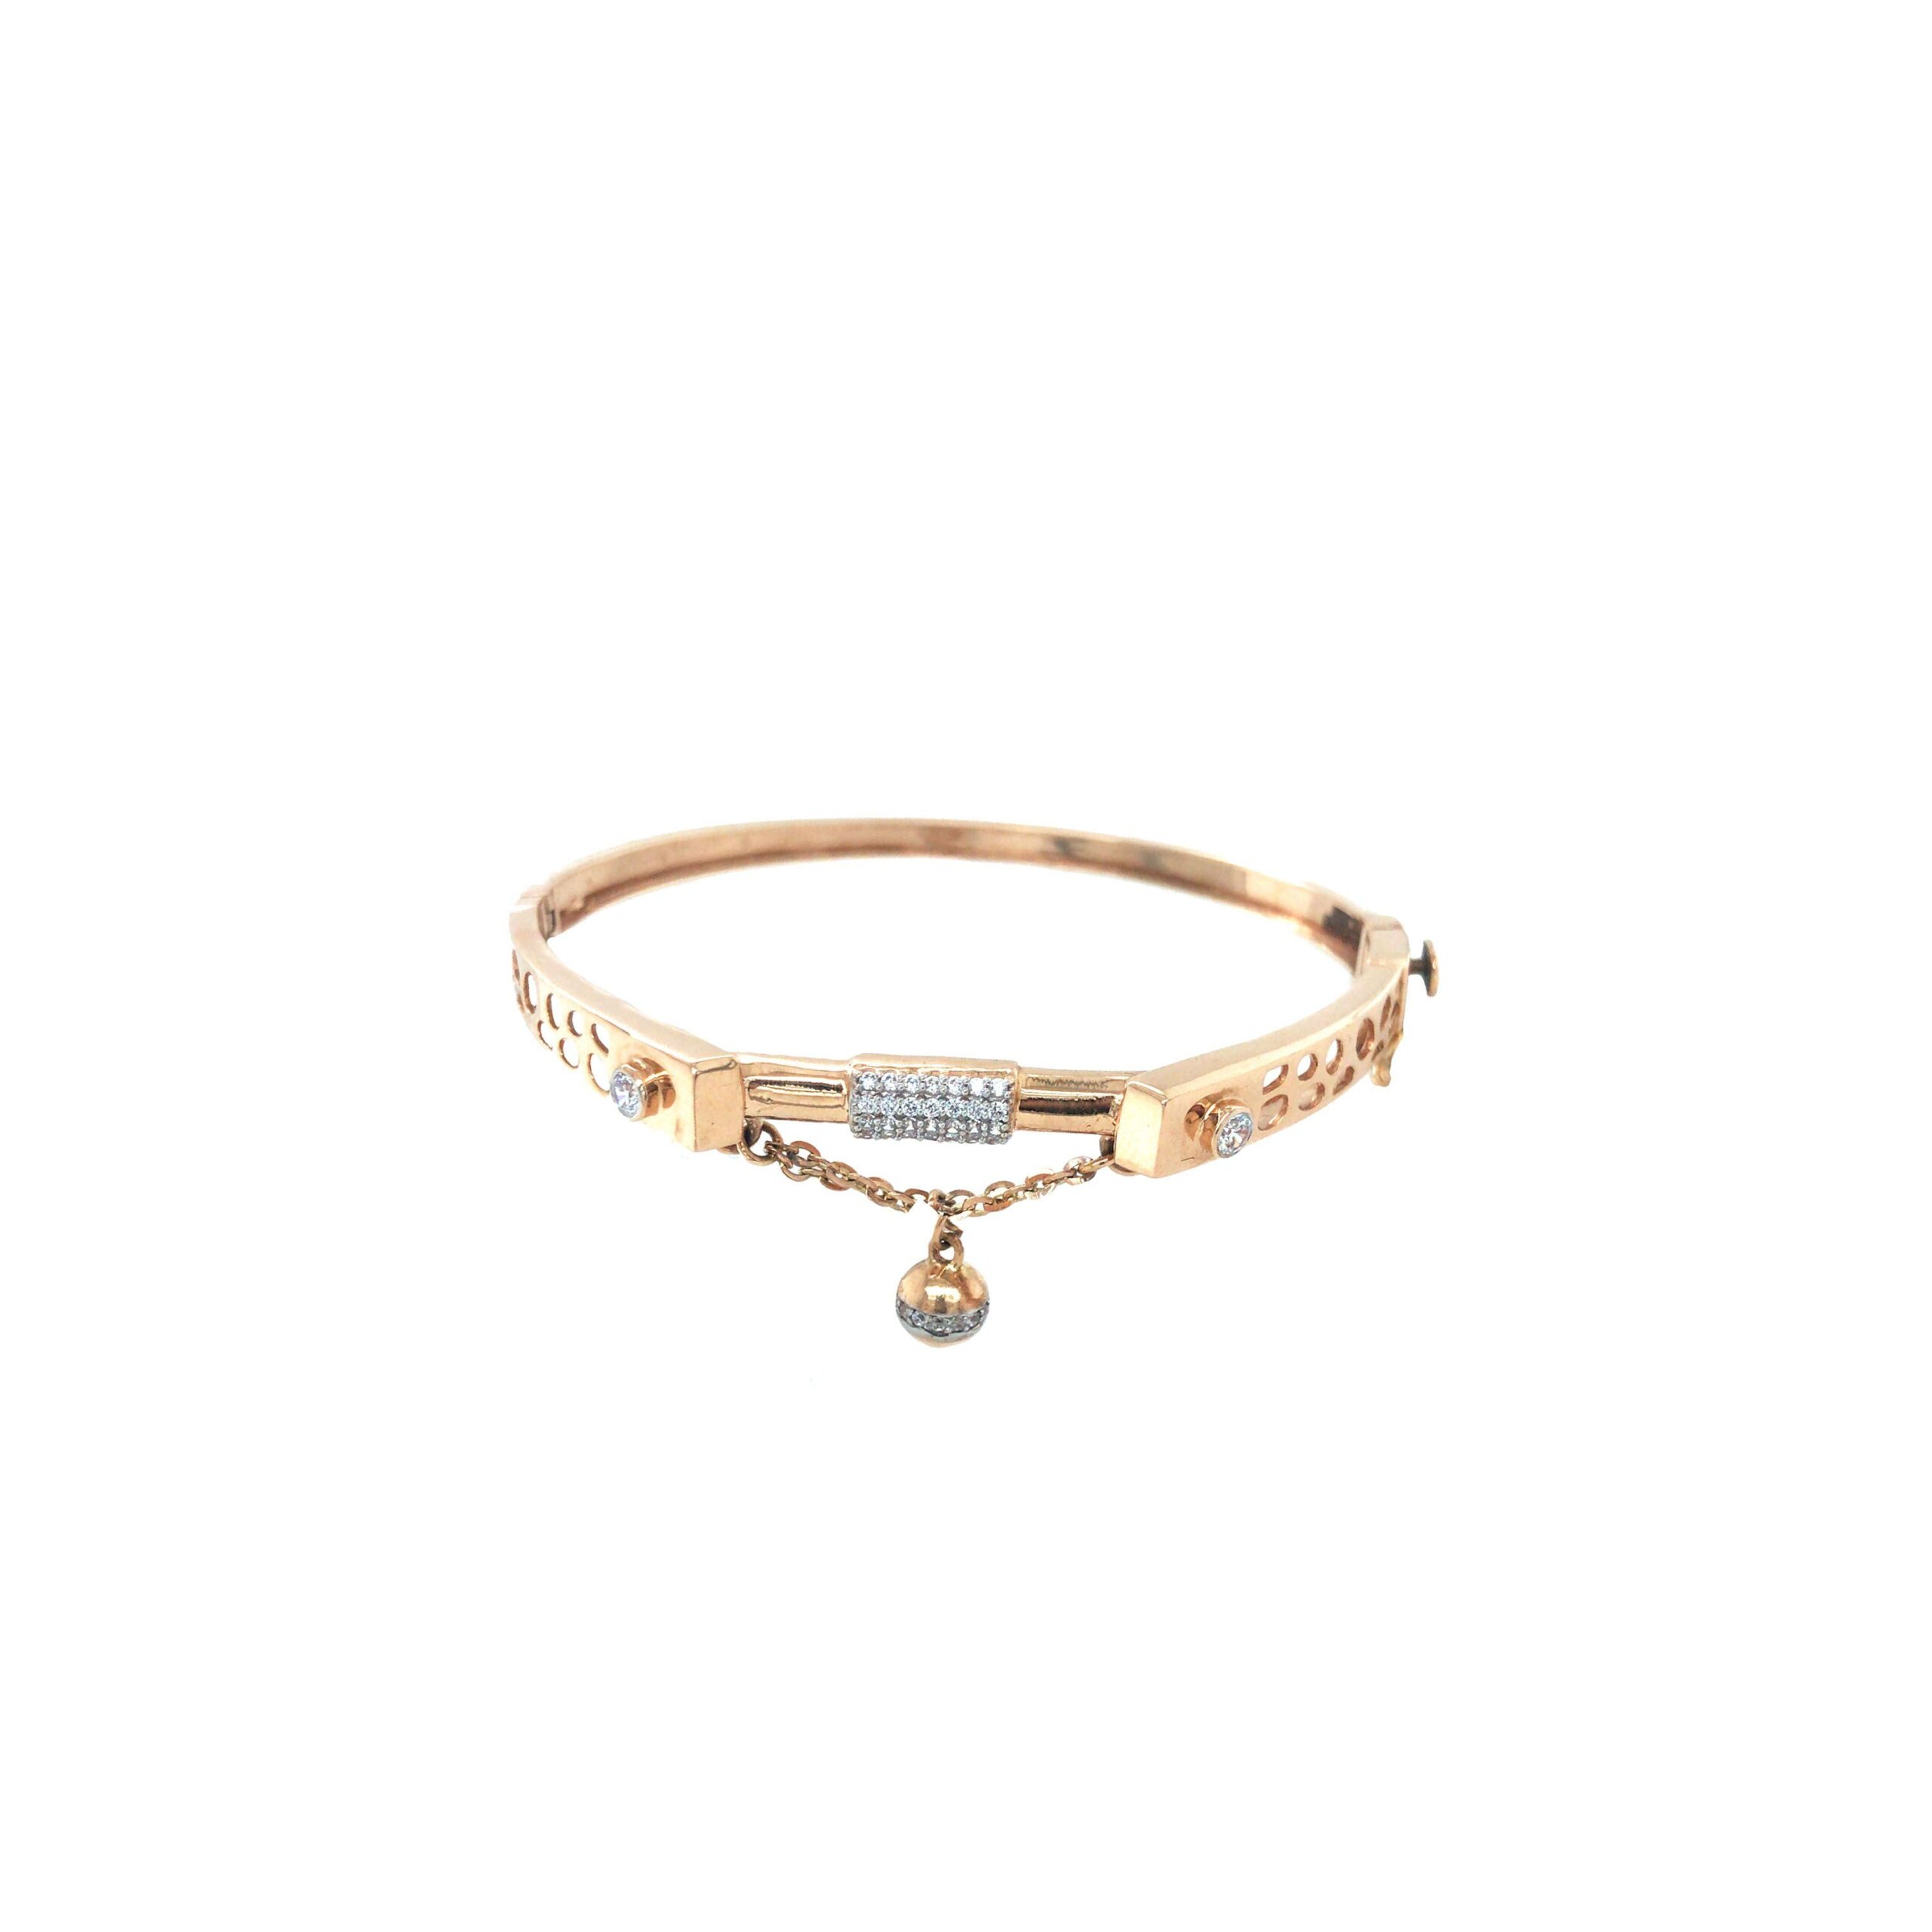 Buy the Rose Gold Flash-Pin Bracelet - Silberry